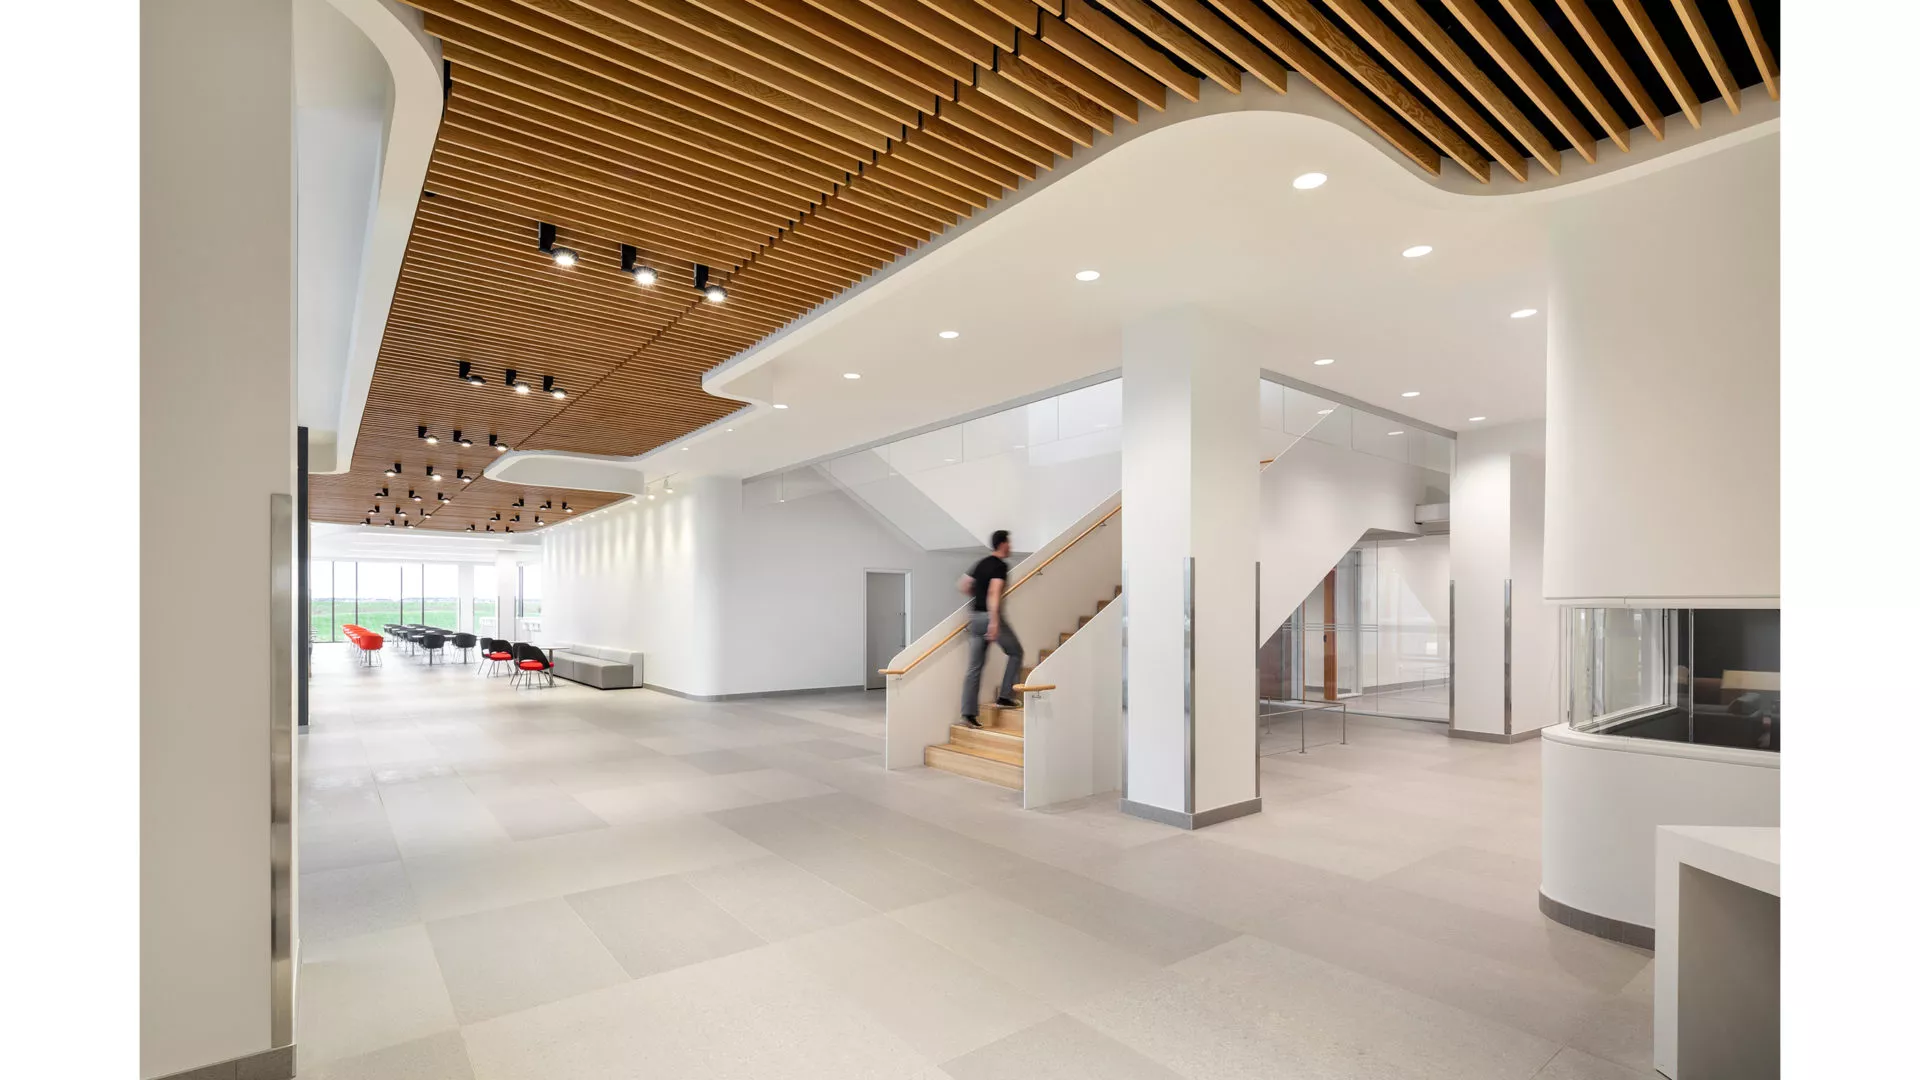 interior view of min stairway in cbs calgary. bright white halls with wood panel ceilings